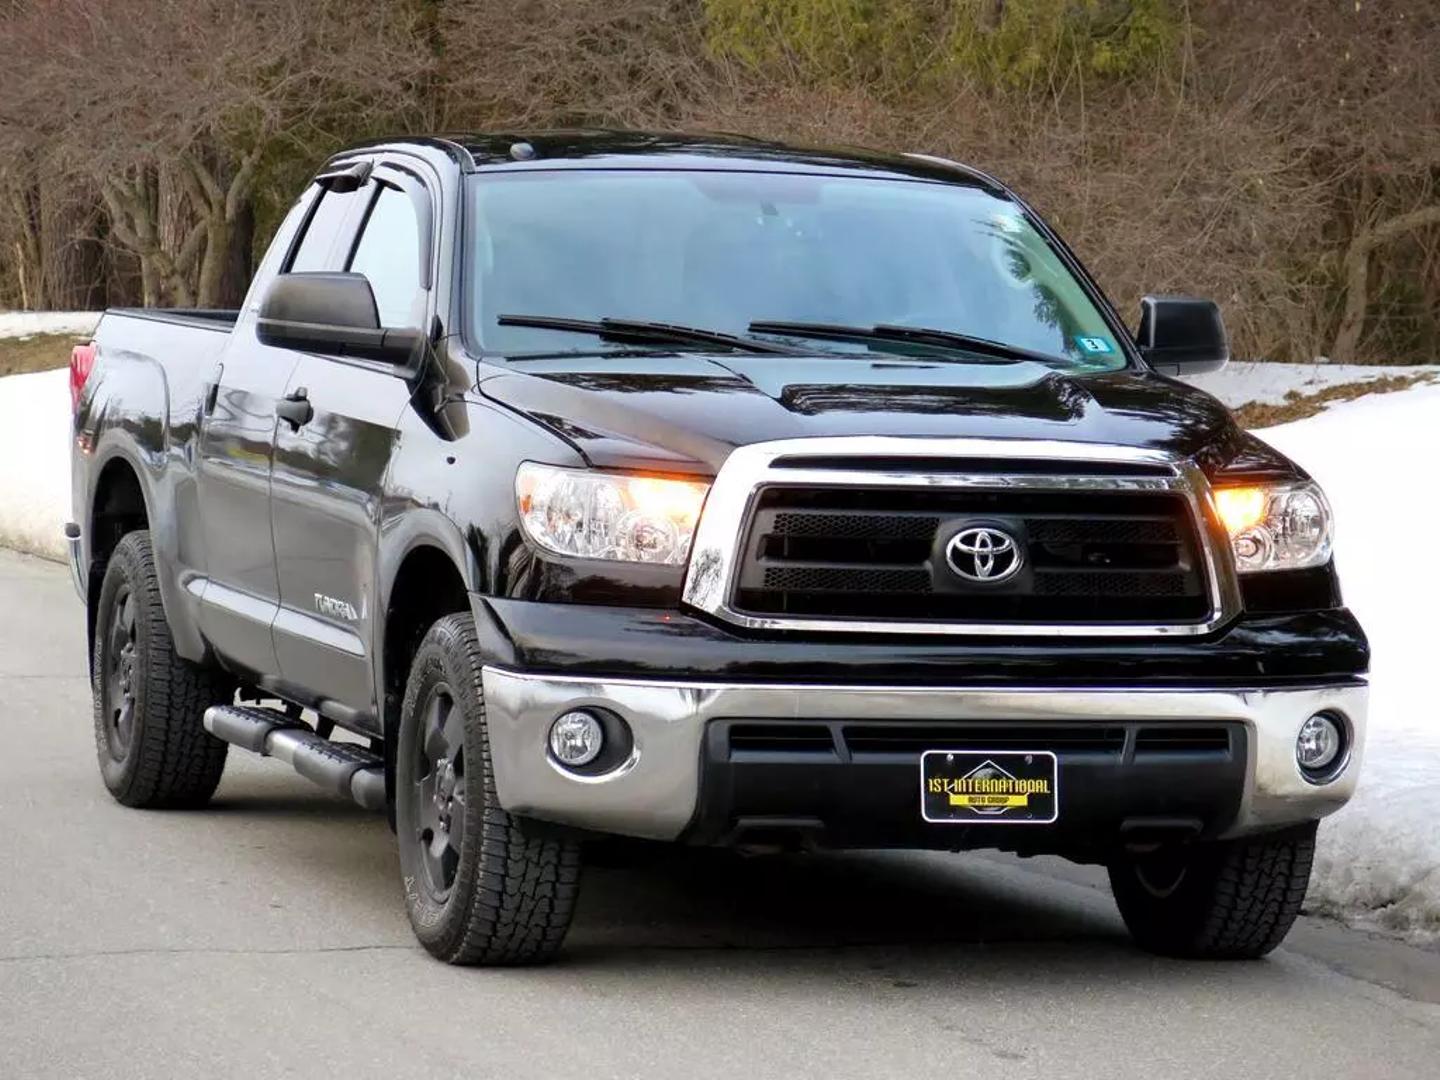 USED TOYOTA TUNDRA DOUBLE CAB 2012 for sale in Merrimack, NH | 1st